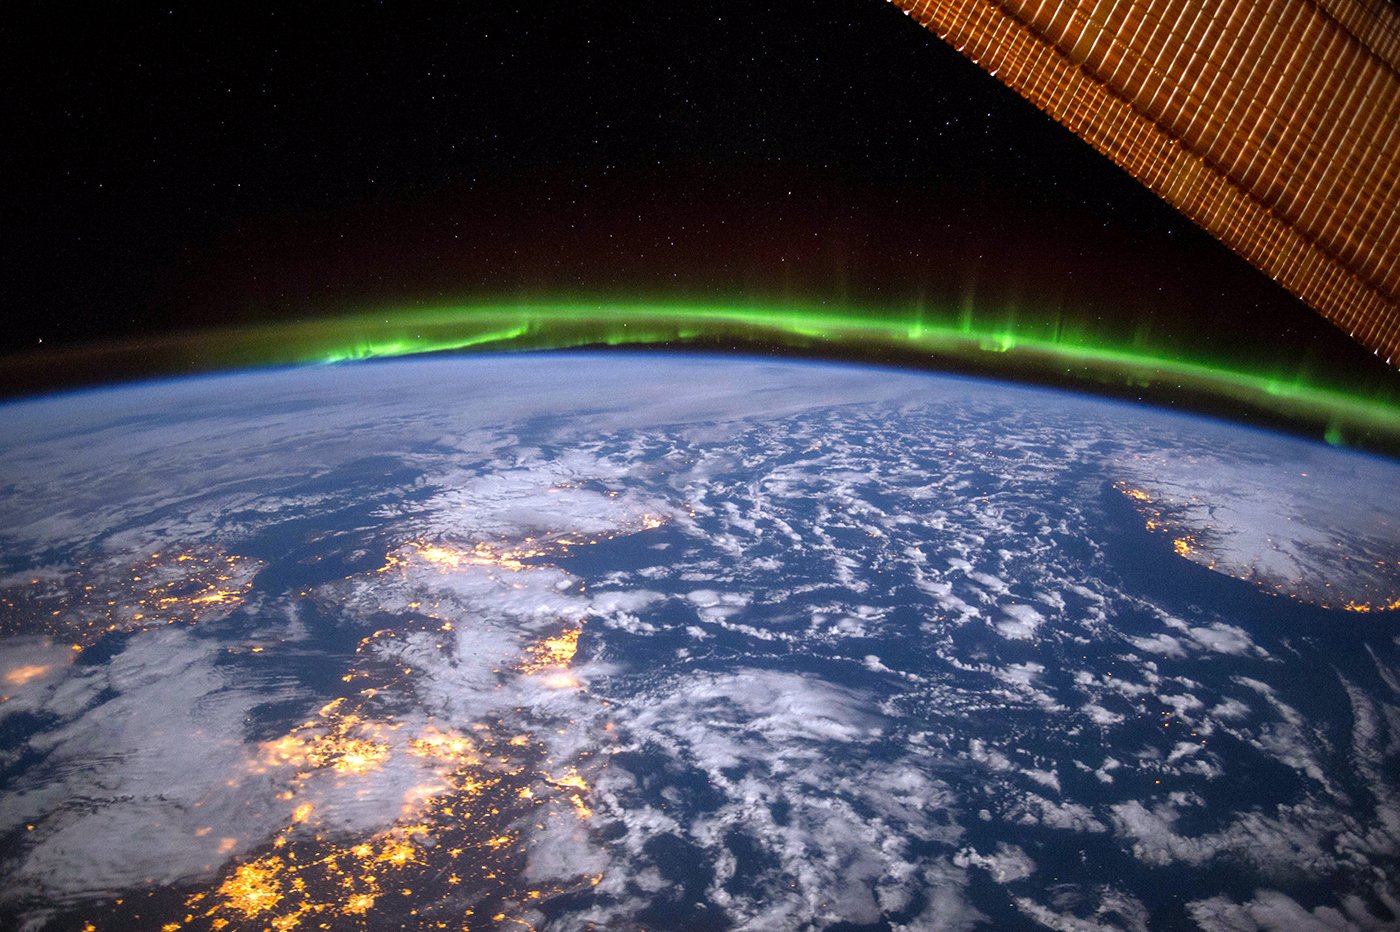 The Aurora over the UK and Ireland. Photo: Terry Virts